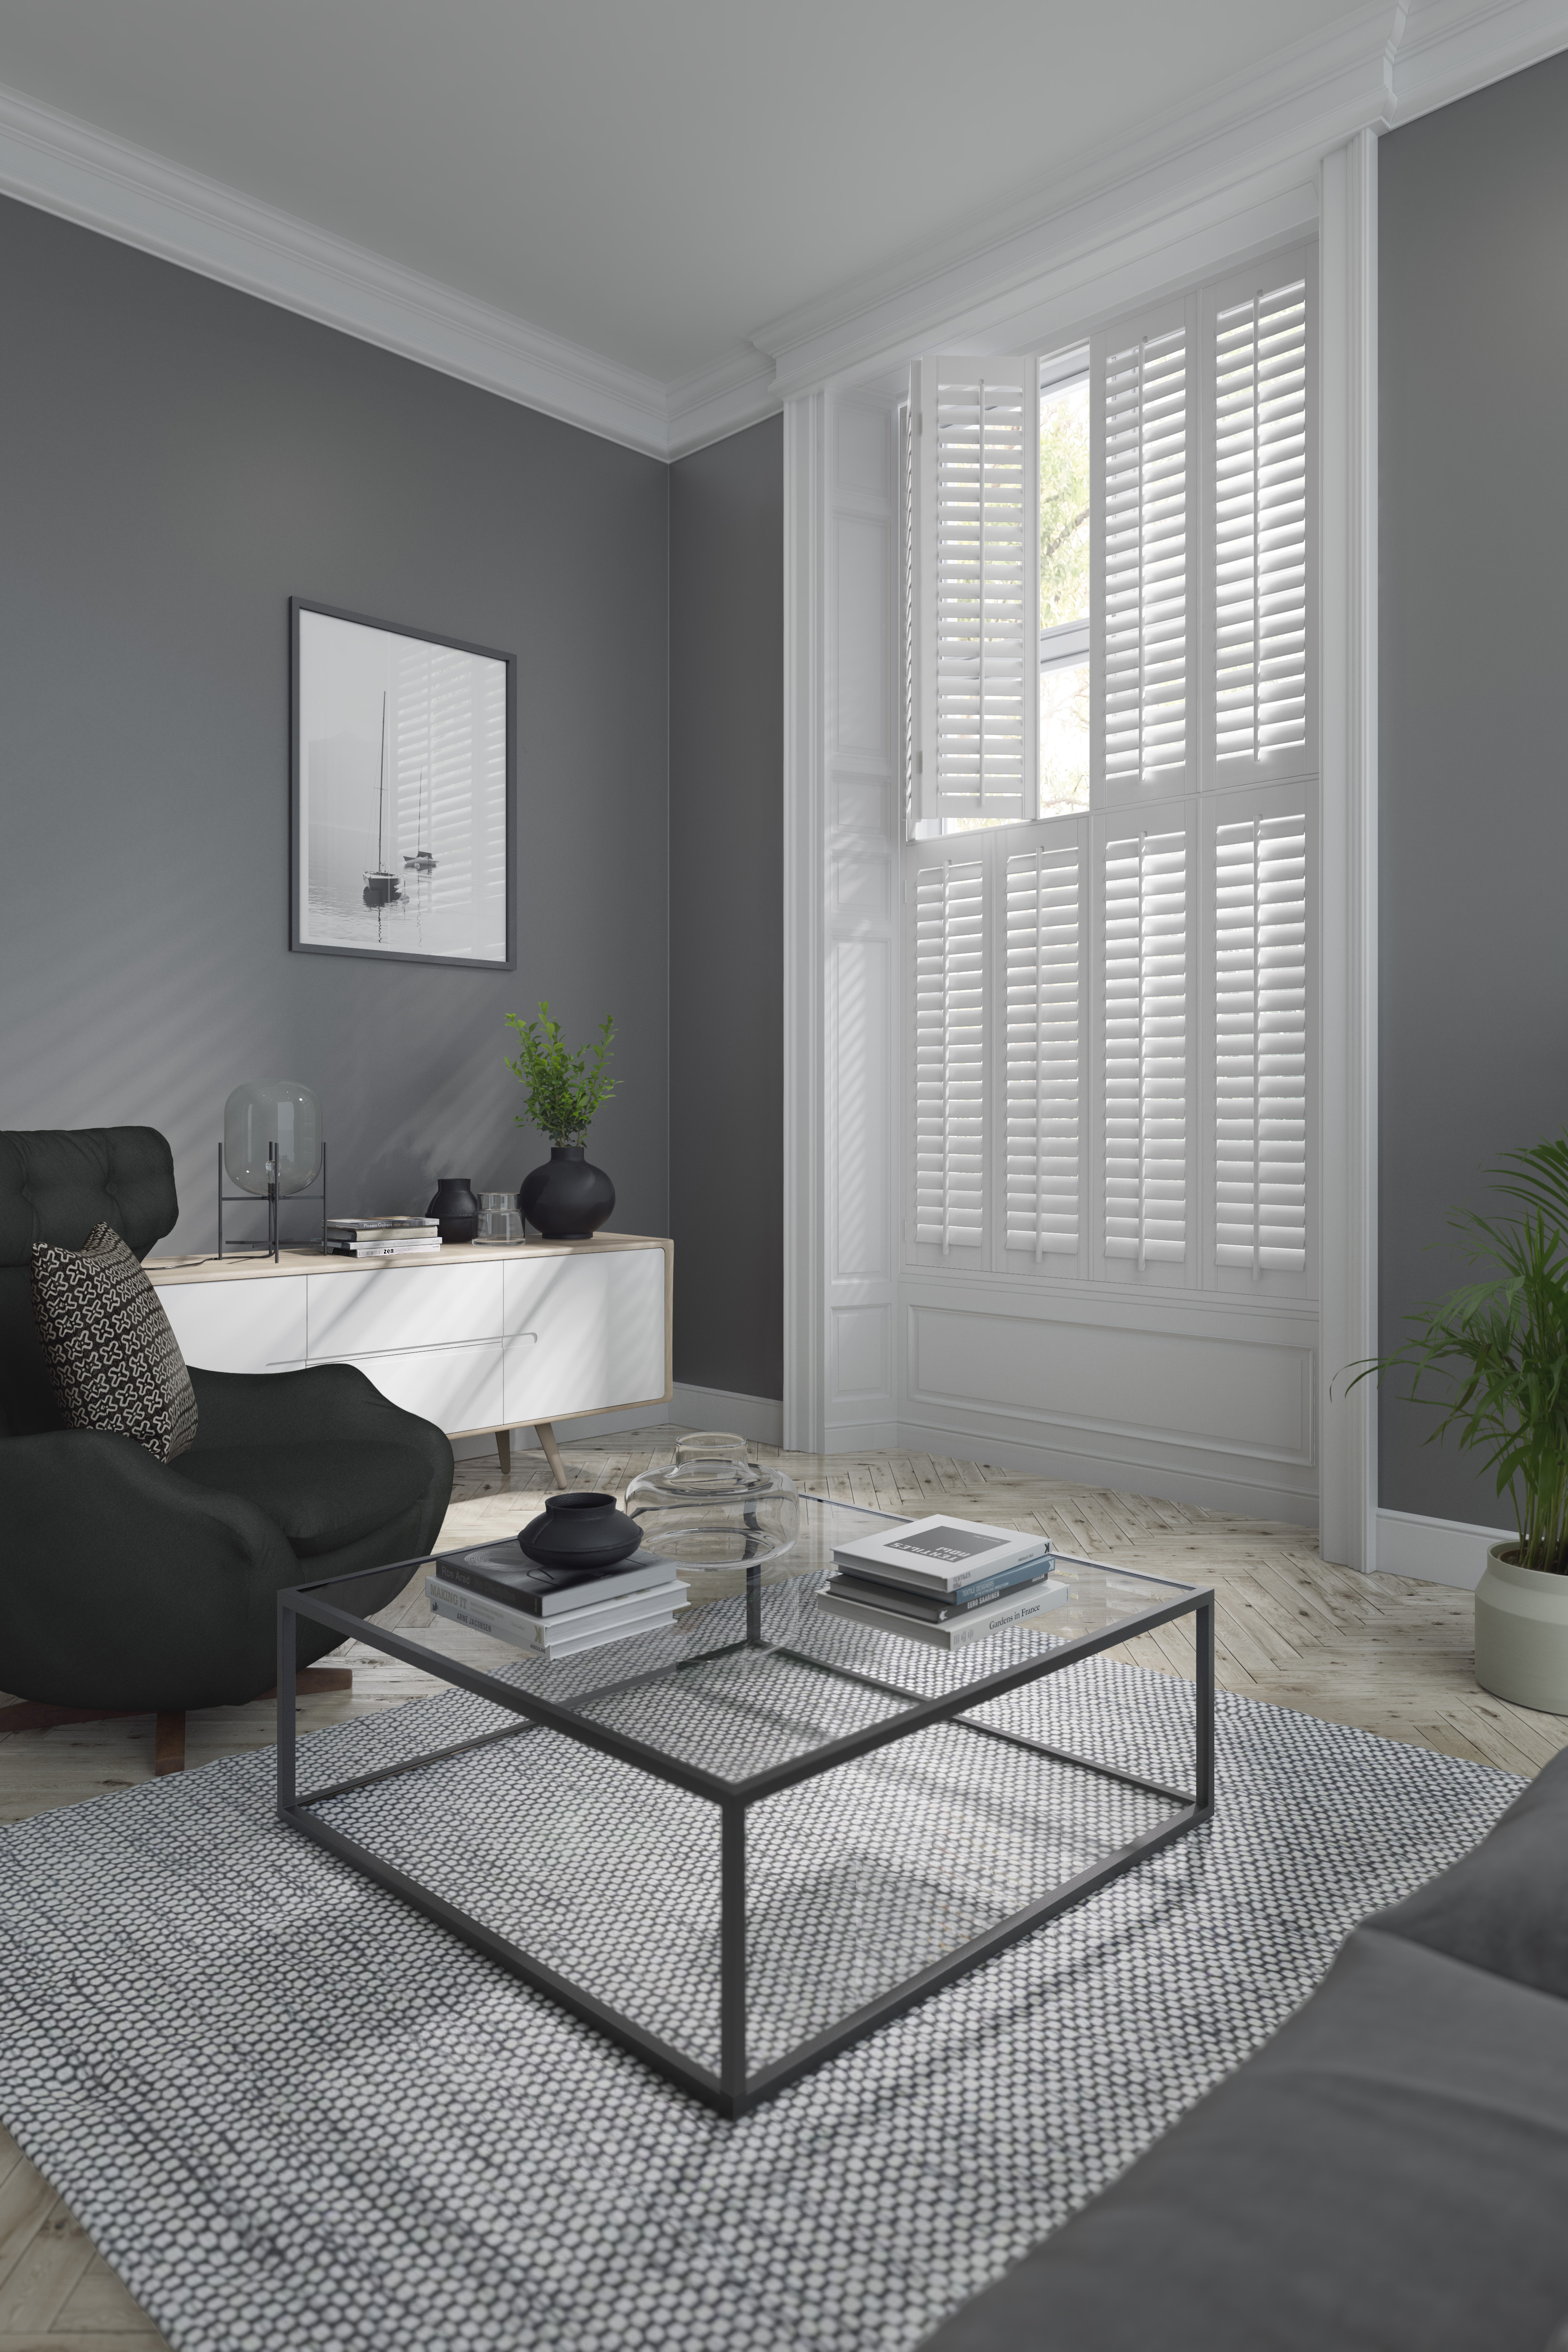 Window Blinds or Shutters: Enhancing Your Home's Style and Comfort